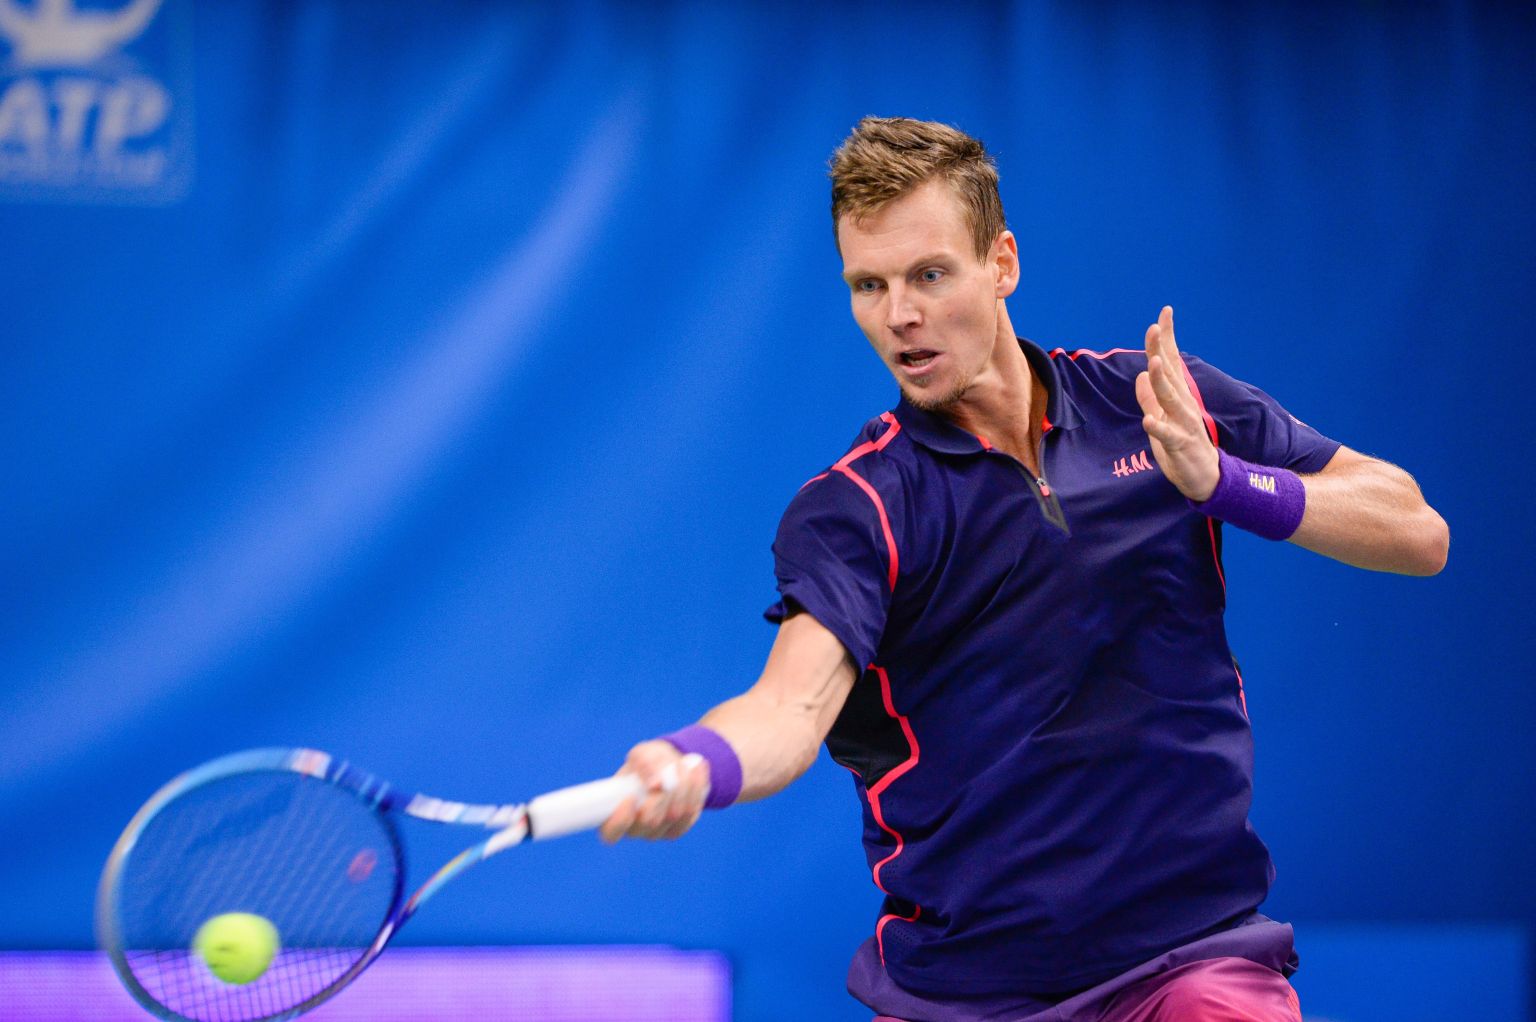 Czech Republic's Tomas Berdych returns the ball to USA's Jack Sock at the ATP Stockholm Open tennis tournament final match in Stockholm on October 25, 2015. AFP PHOTO/JONATHAN NACKSTRAND        (Photo credit should read JONATHAN NACKSTRAND/AFP/Getty Images)